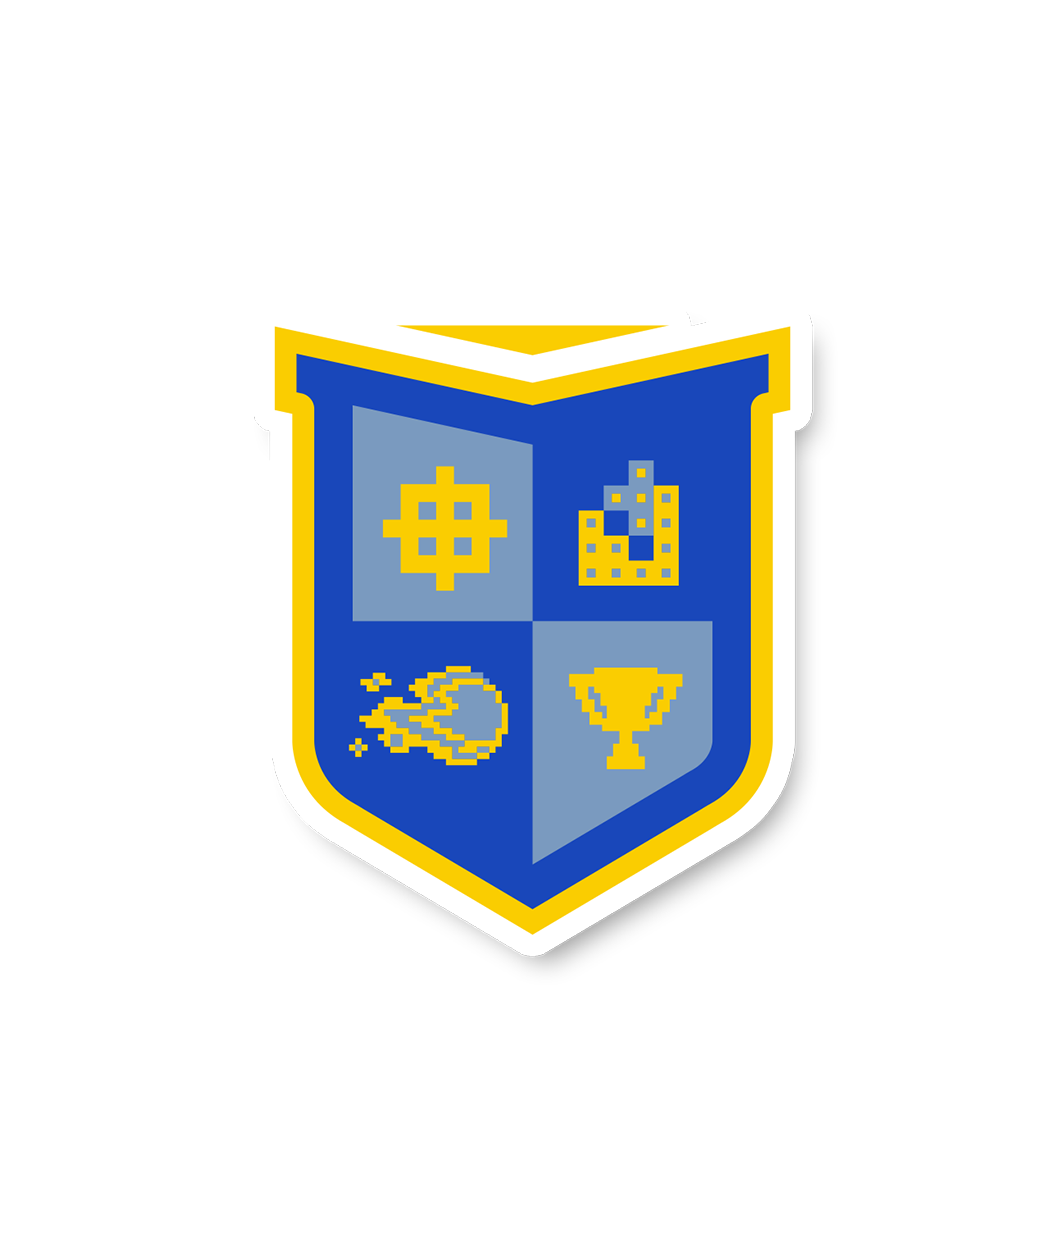 Sticker in the shape of a shield to resemble the VGHS Crest with it's pixelated designs in each of the four corners.